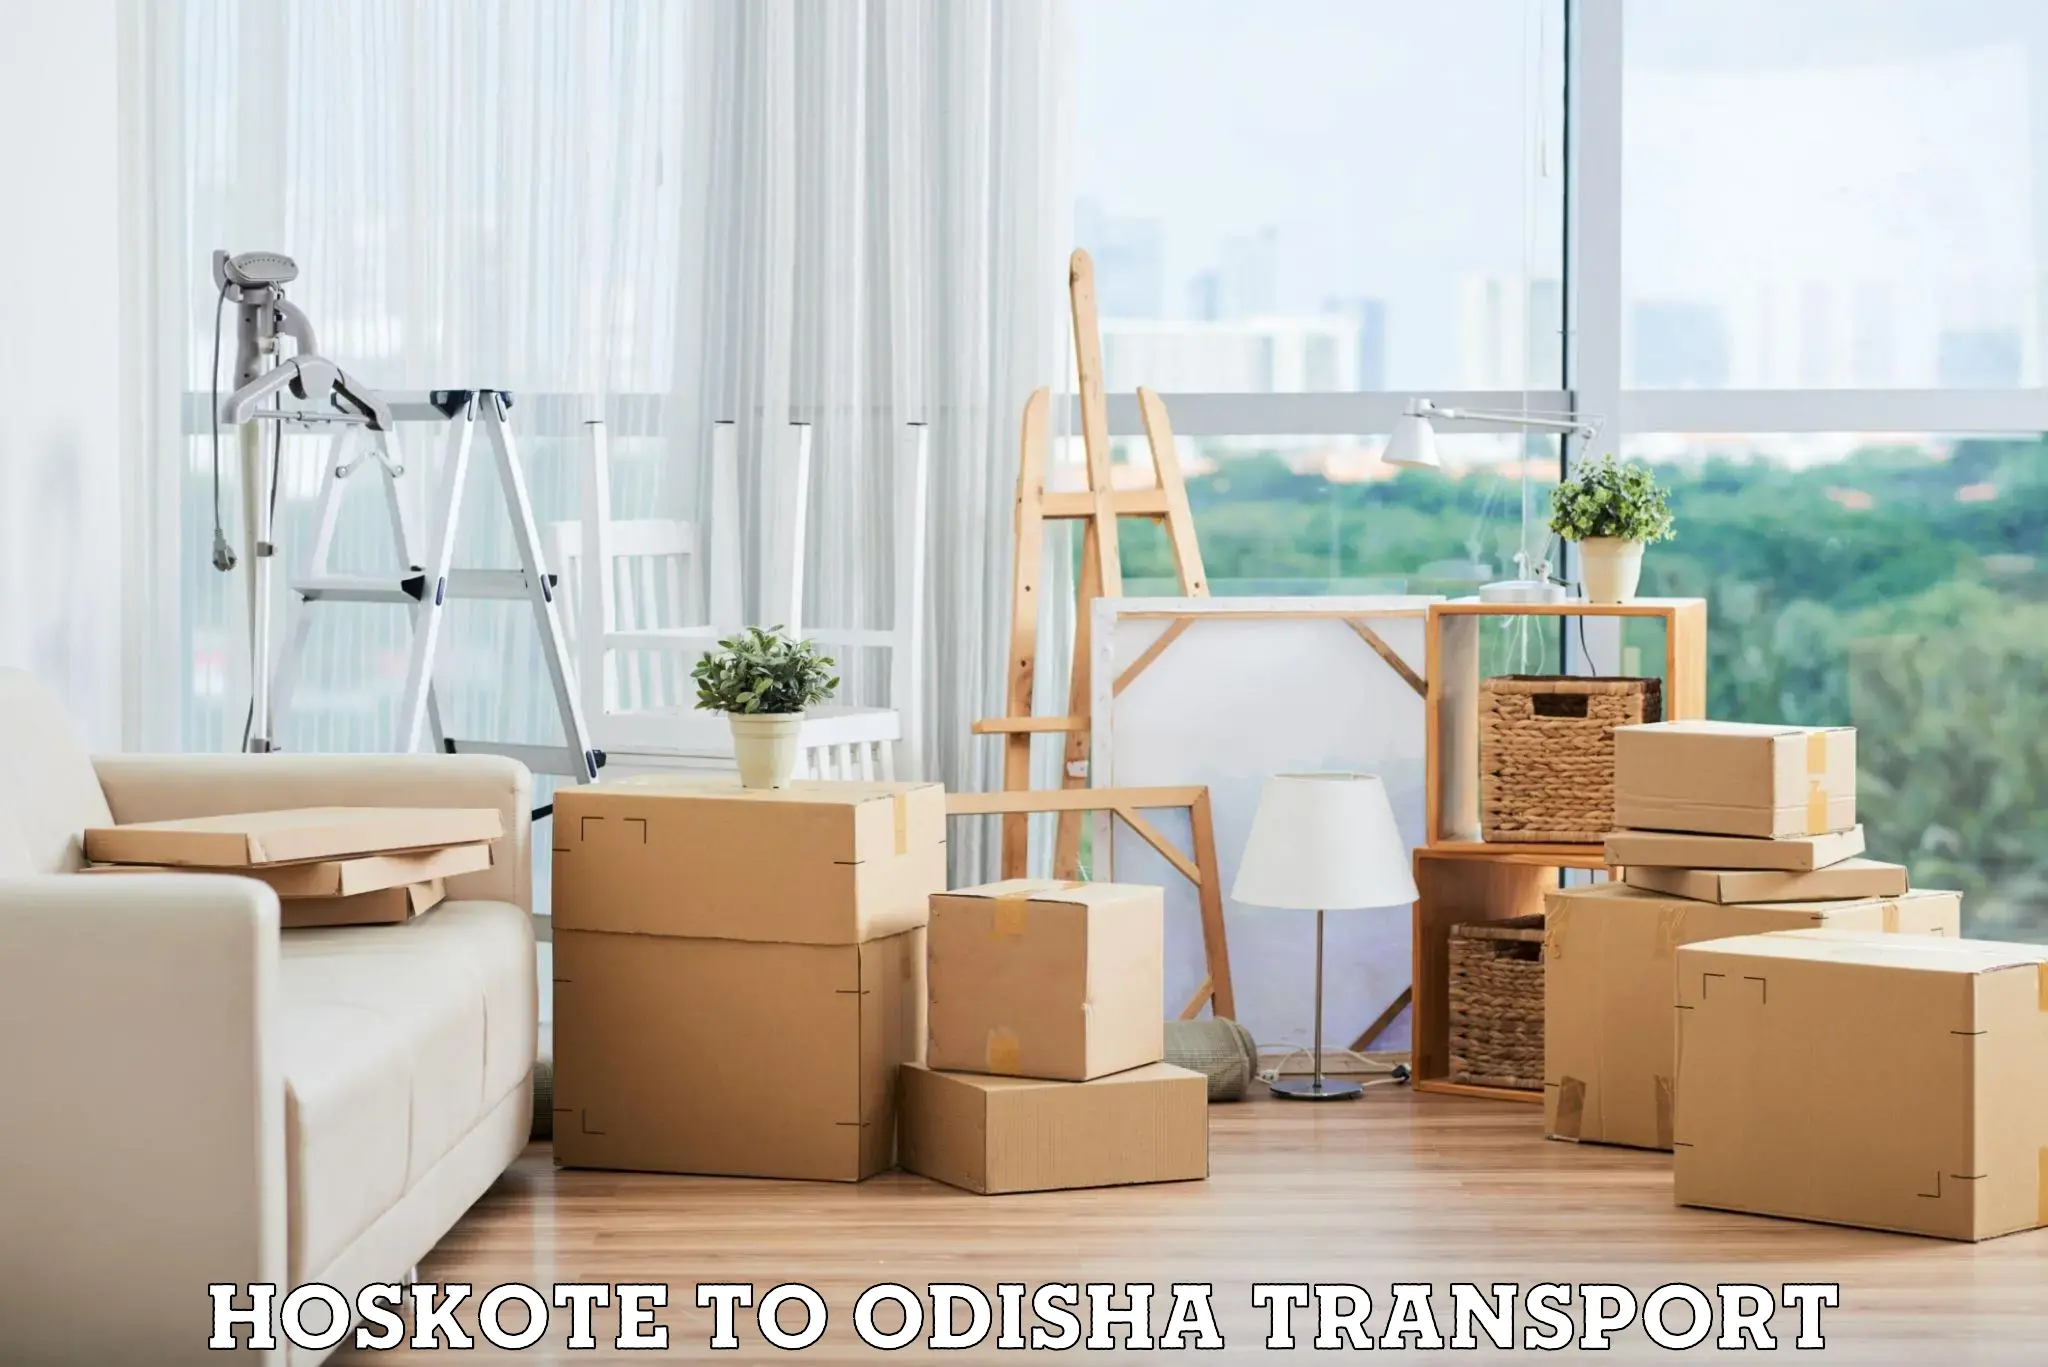 Road transport services in Hoskote to Odisha